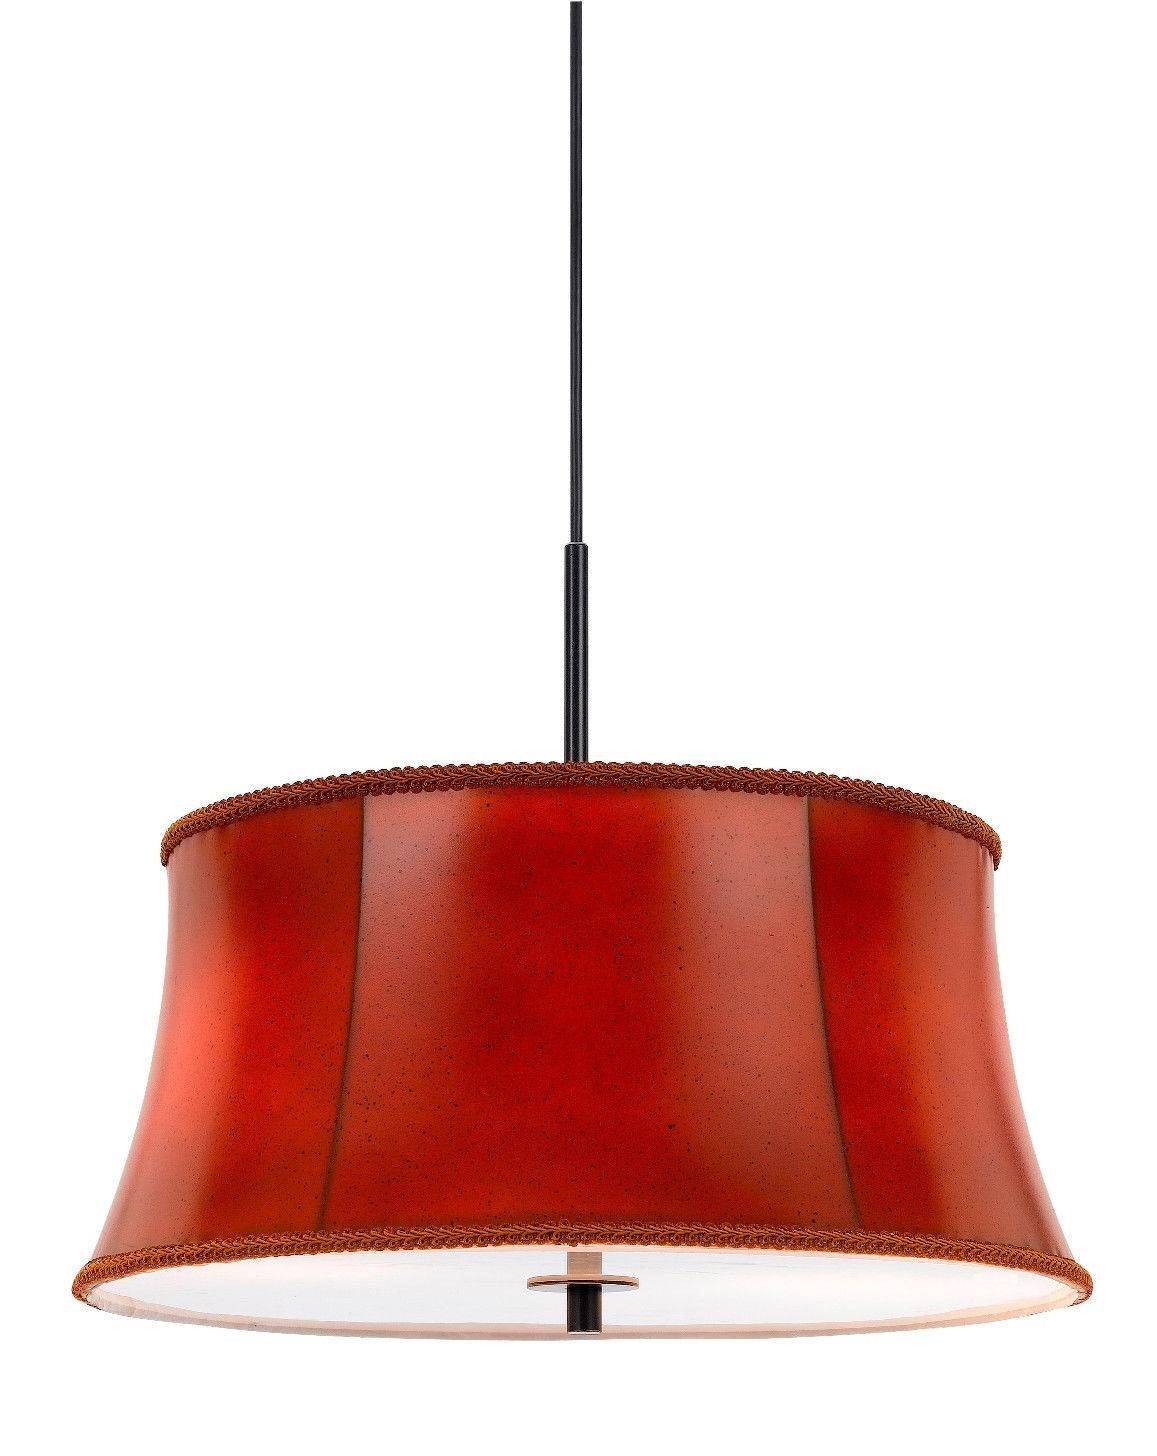 Drum Pendant Lighting | Home Designs Within Red Drum Pendant Lights (Photo 7 of 15)